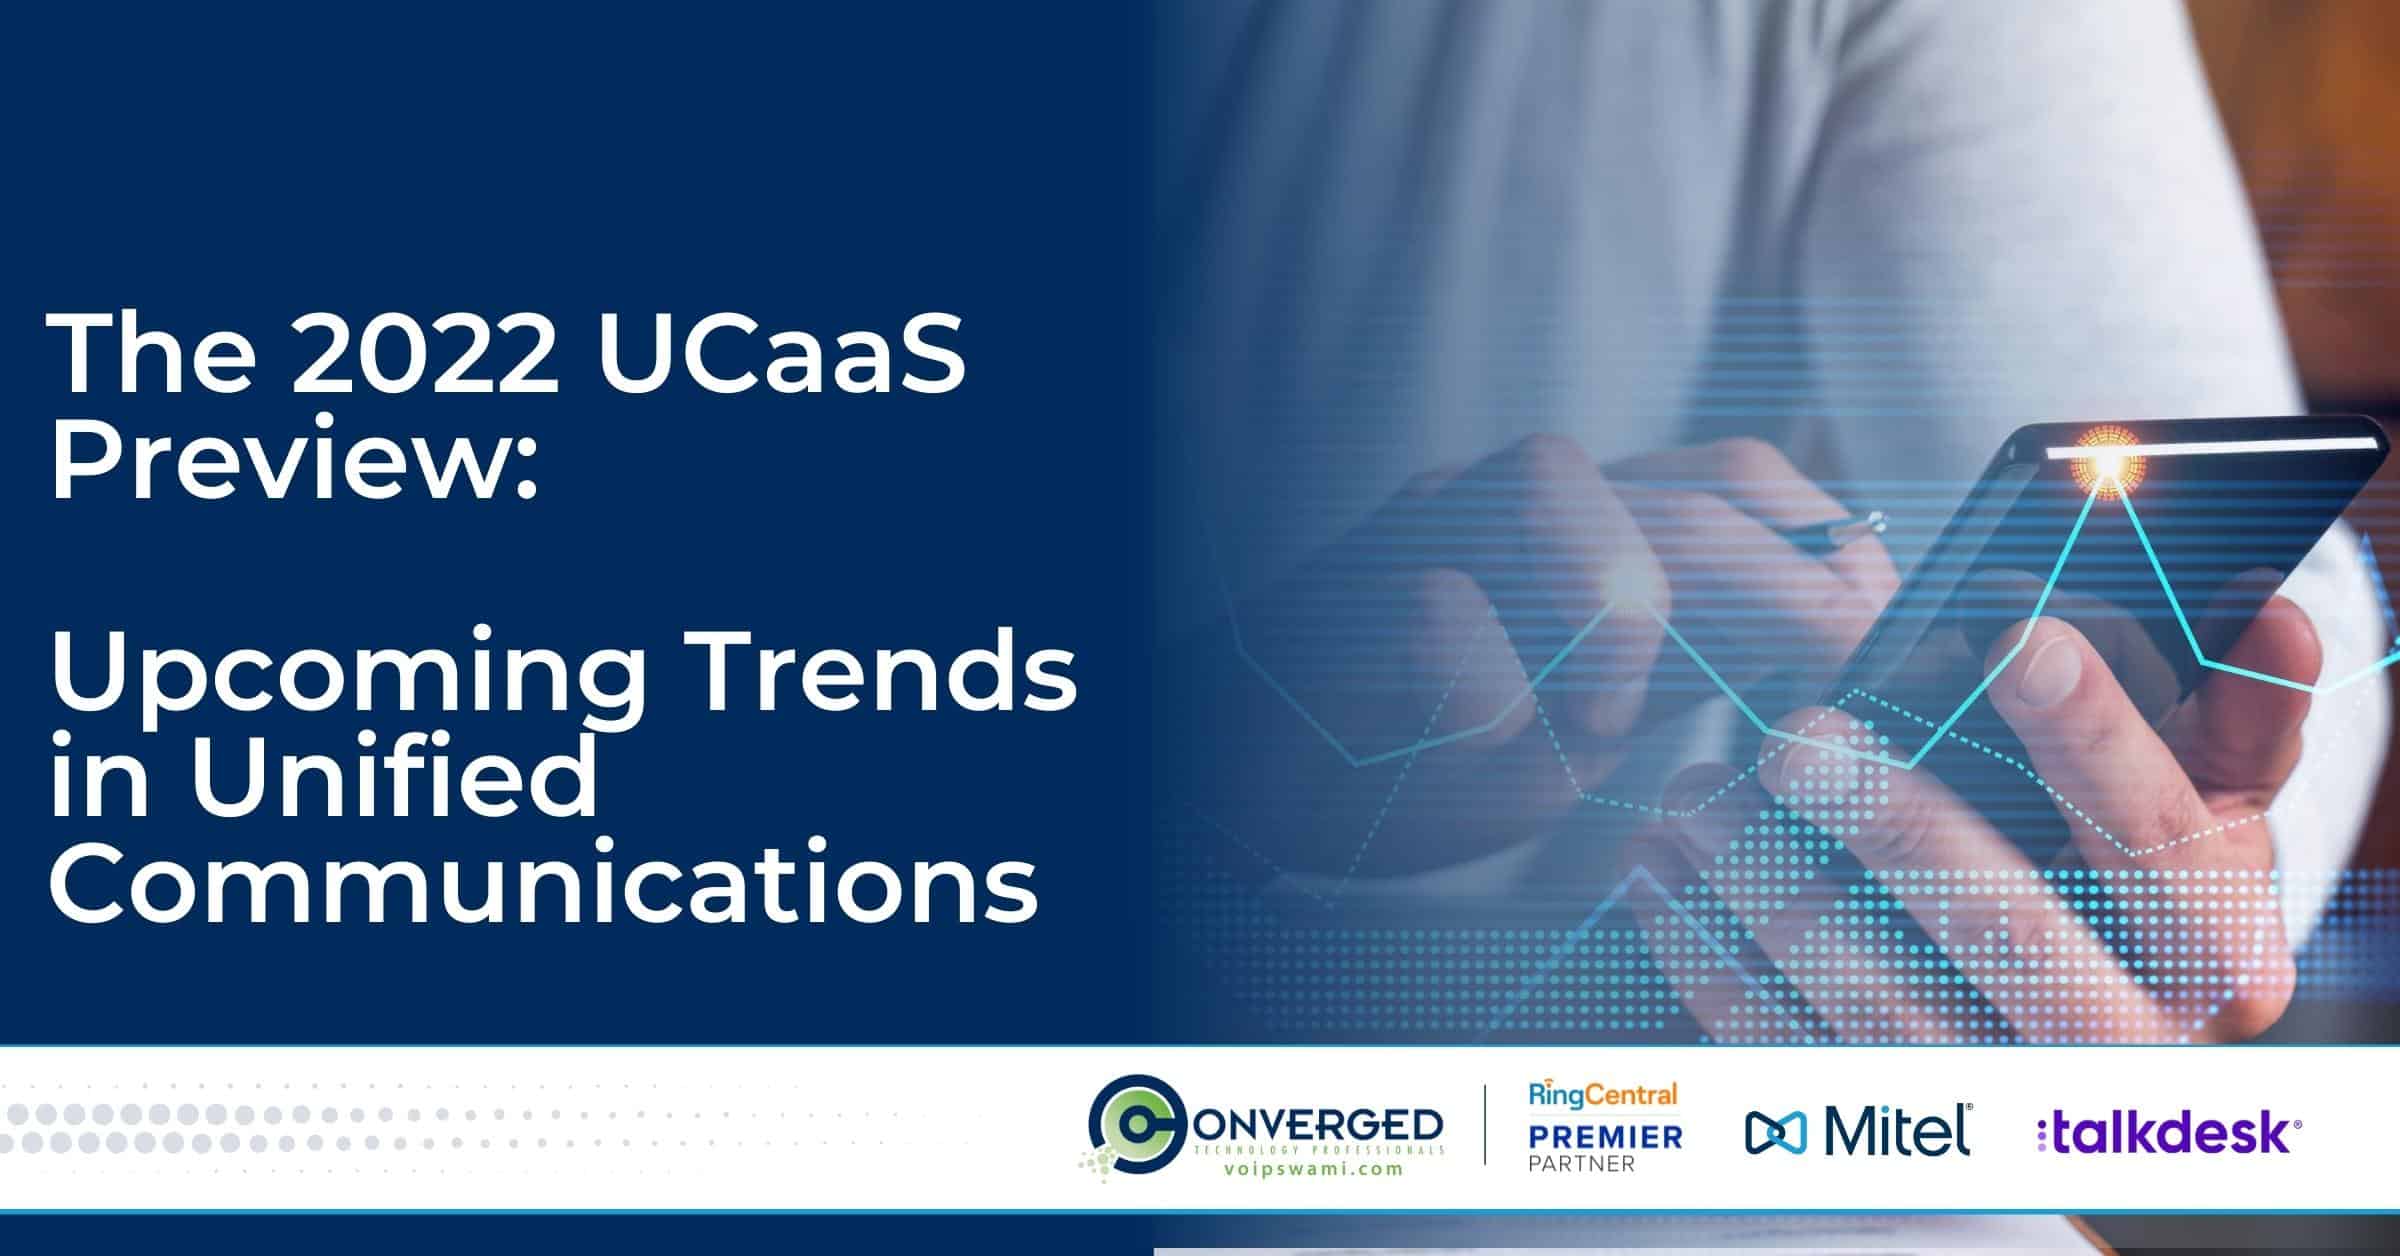 The 2022 UCaaS Preview Upcoming Trends in Unified Communications